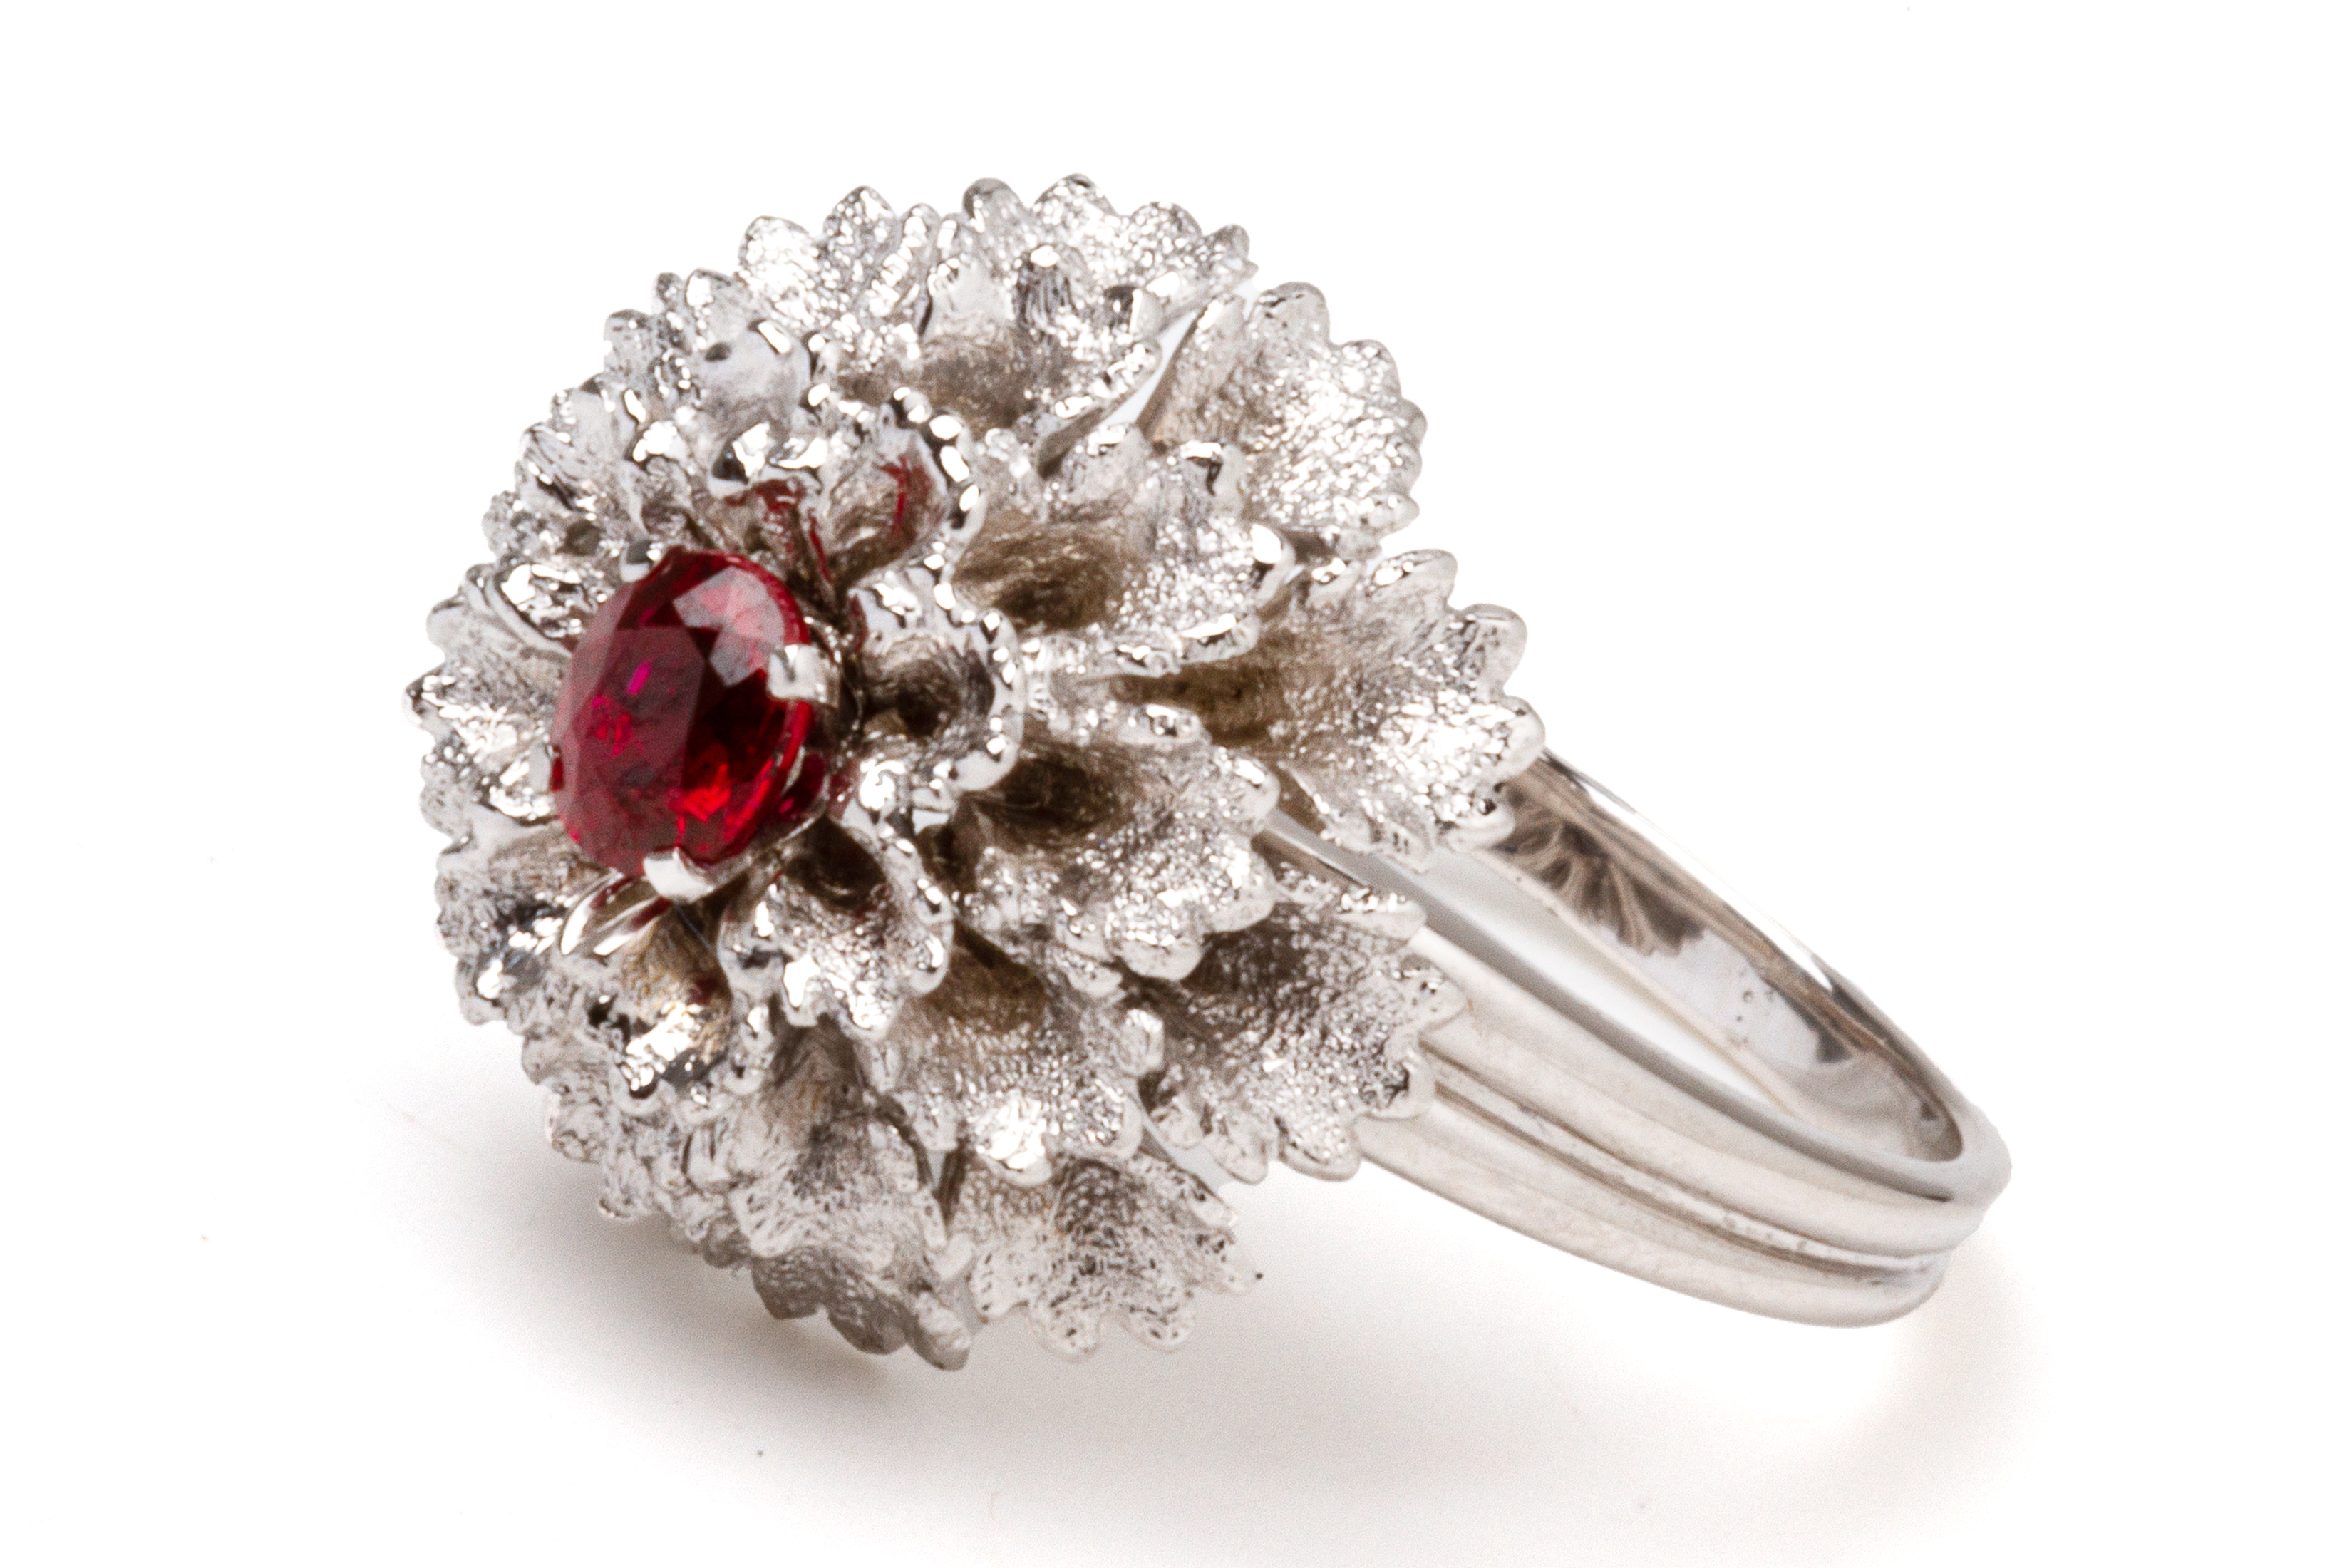 A RUBY FLOWERHEAD RING - Image 2 of 4